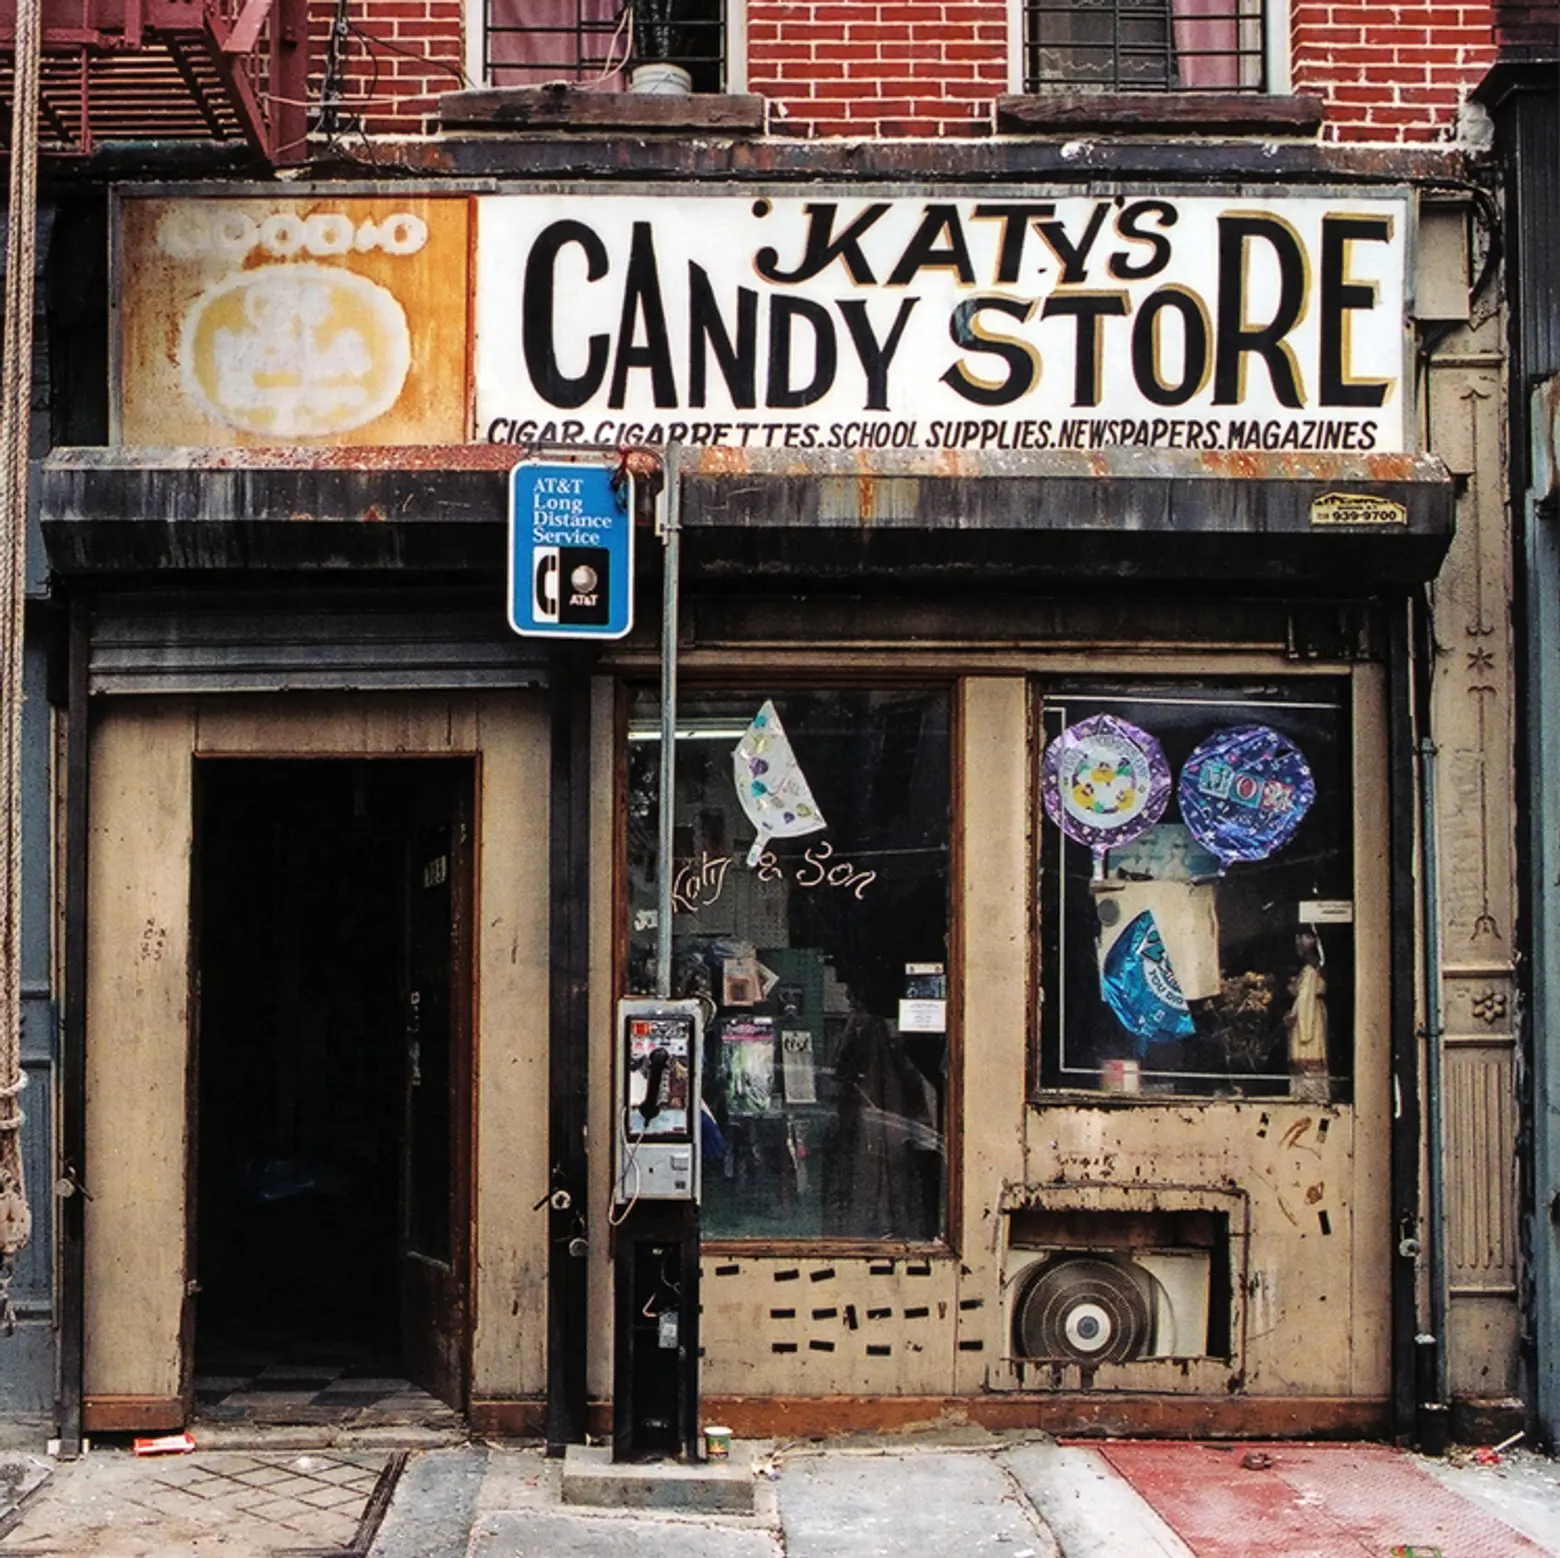 Katy's Candy Store, Privilege Signs, James and Karla Murray, disappearing storefronts, NYC mom and pops